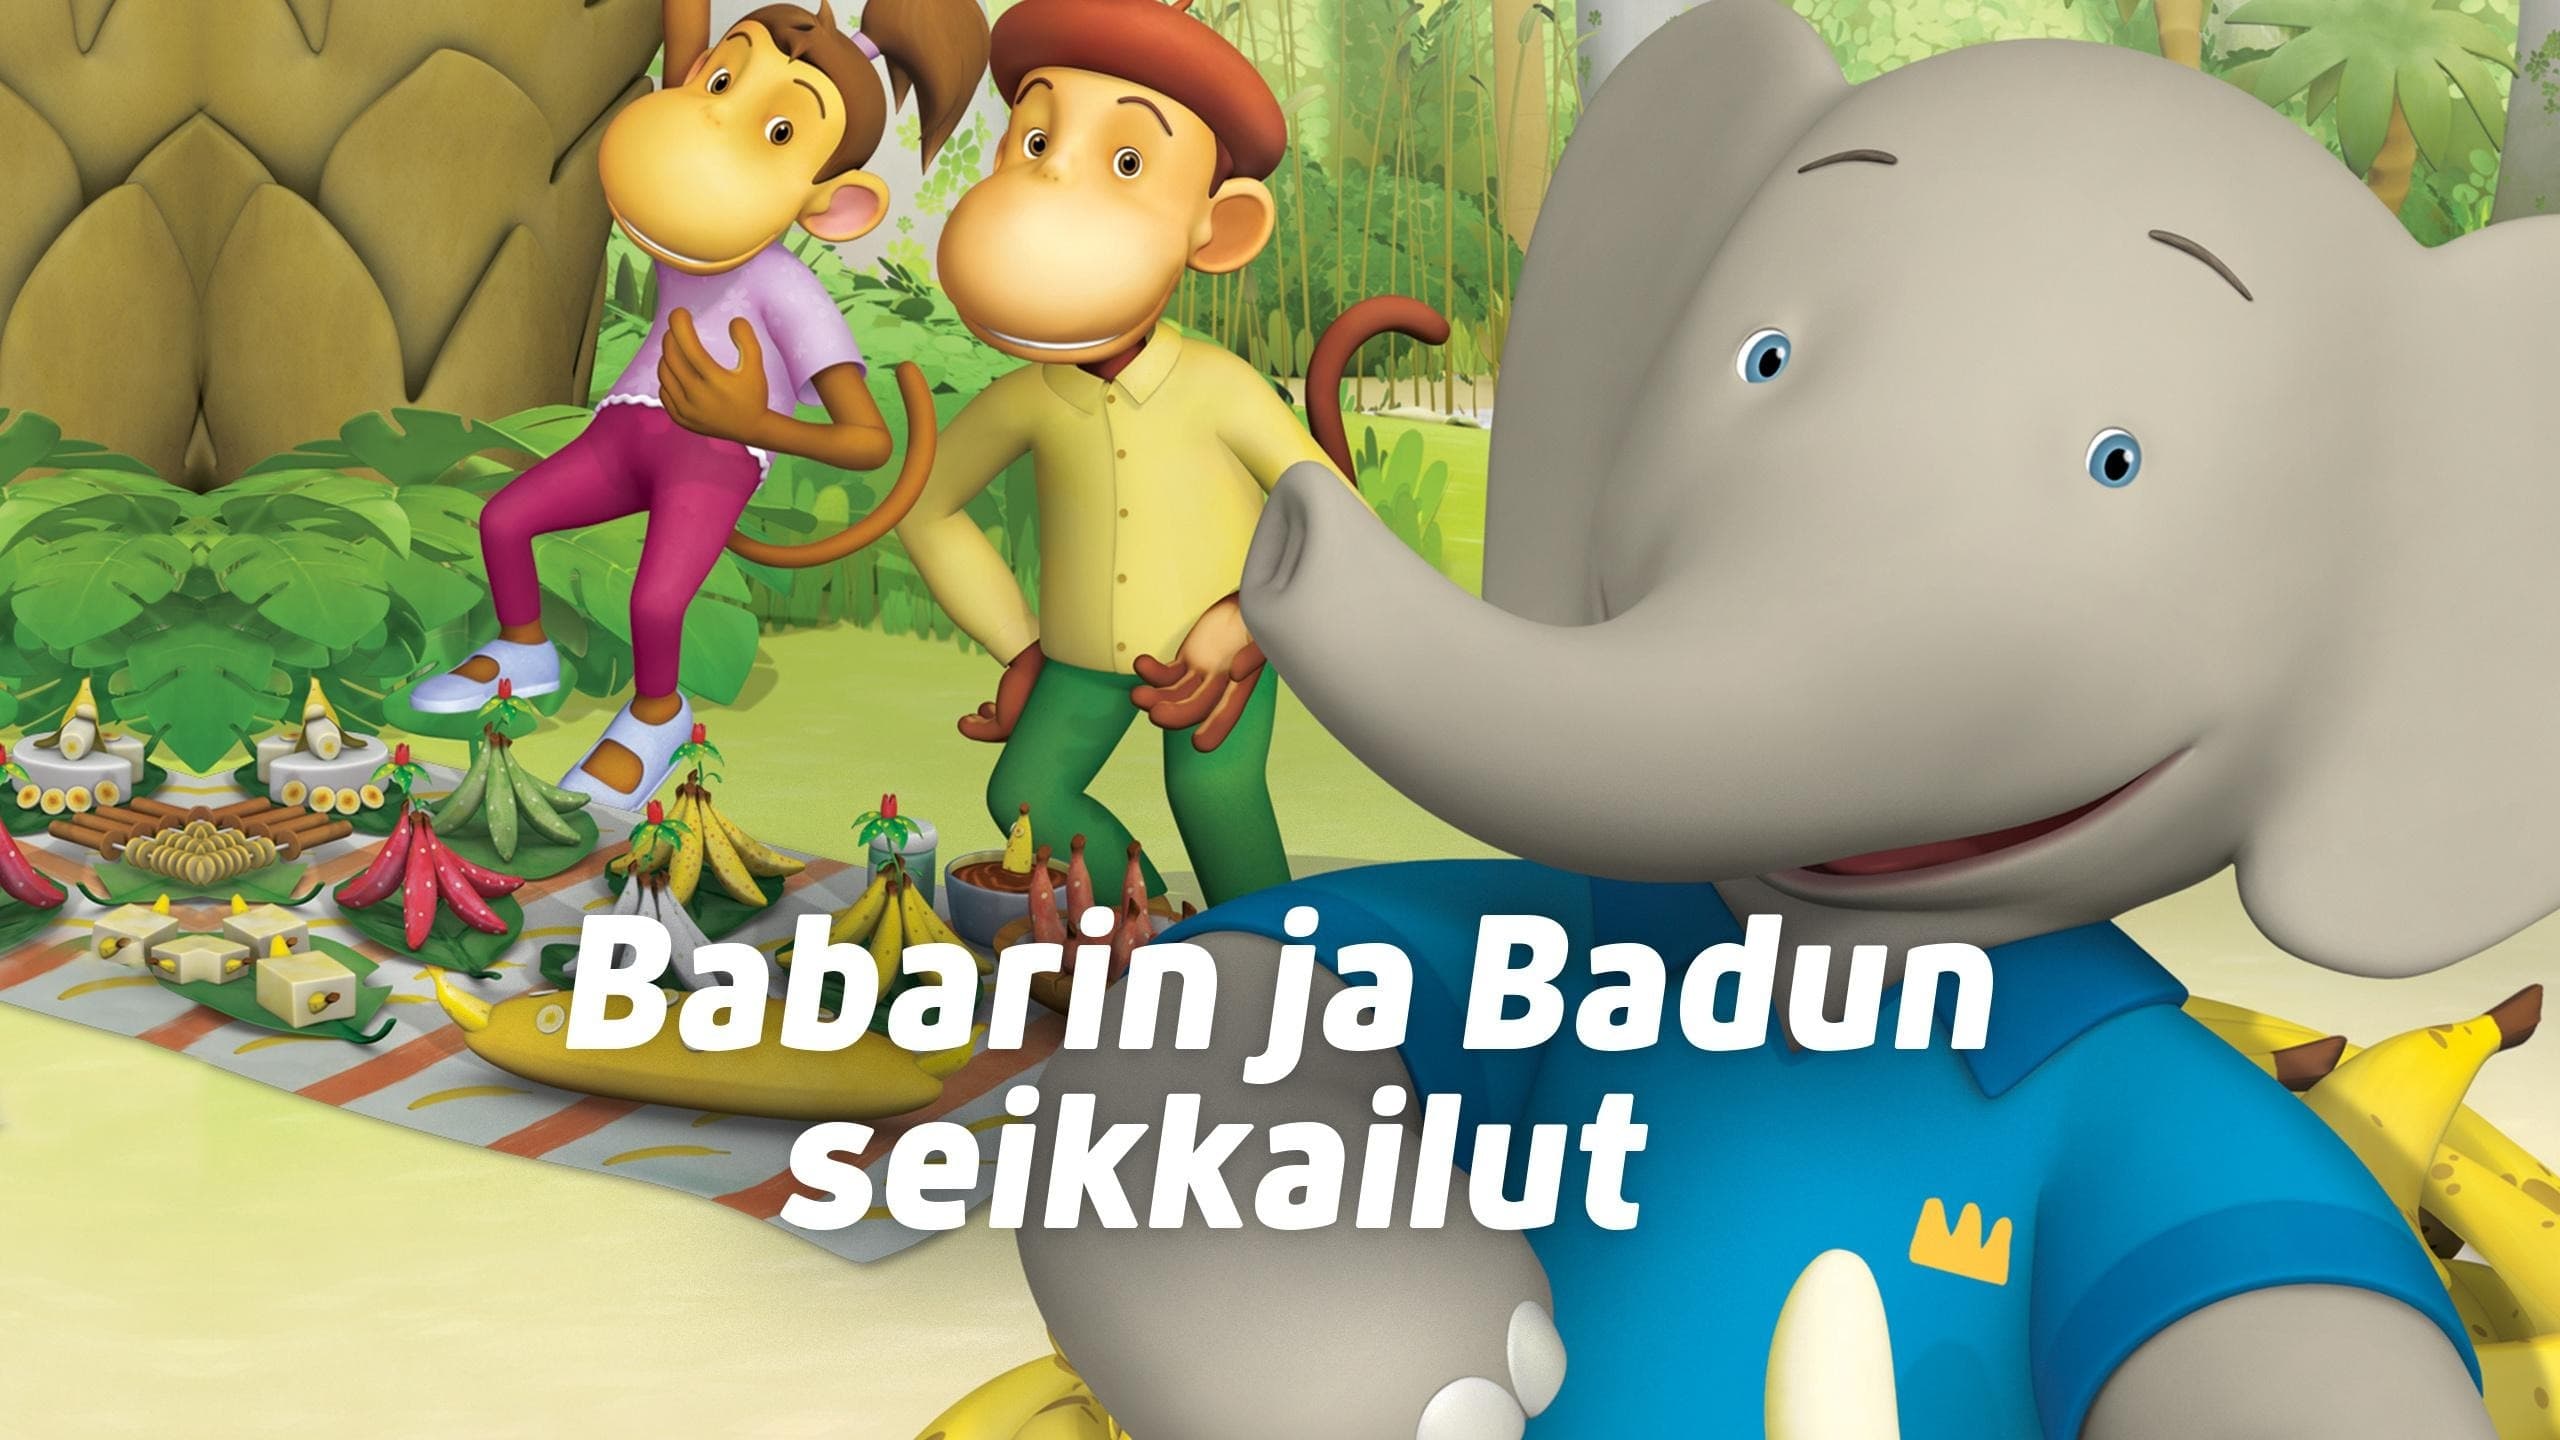 Watch Babar and the Adventures of Badou Online